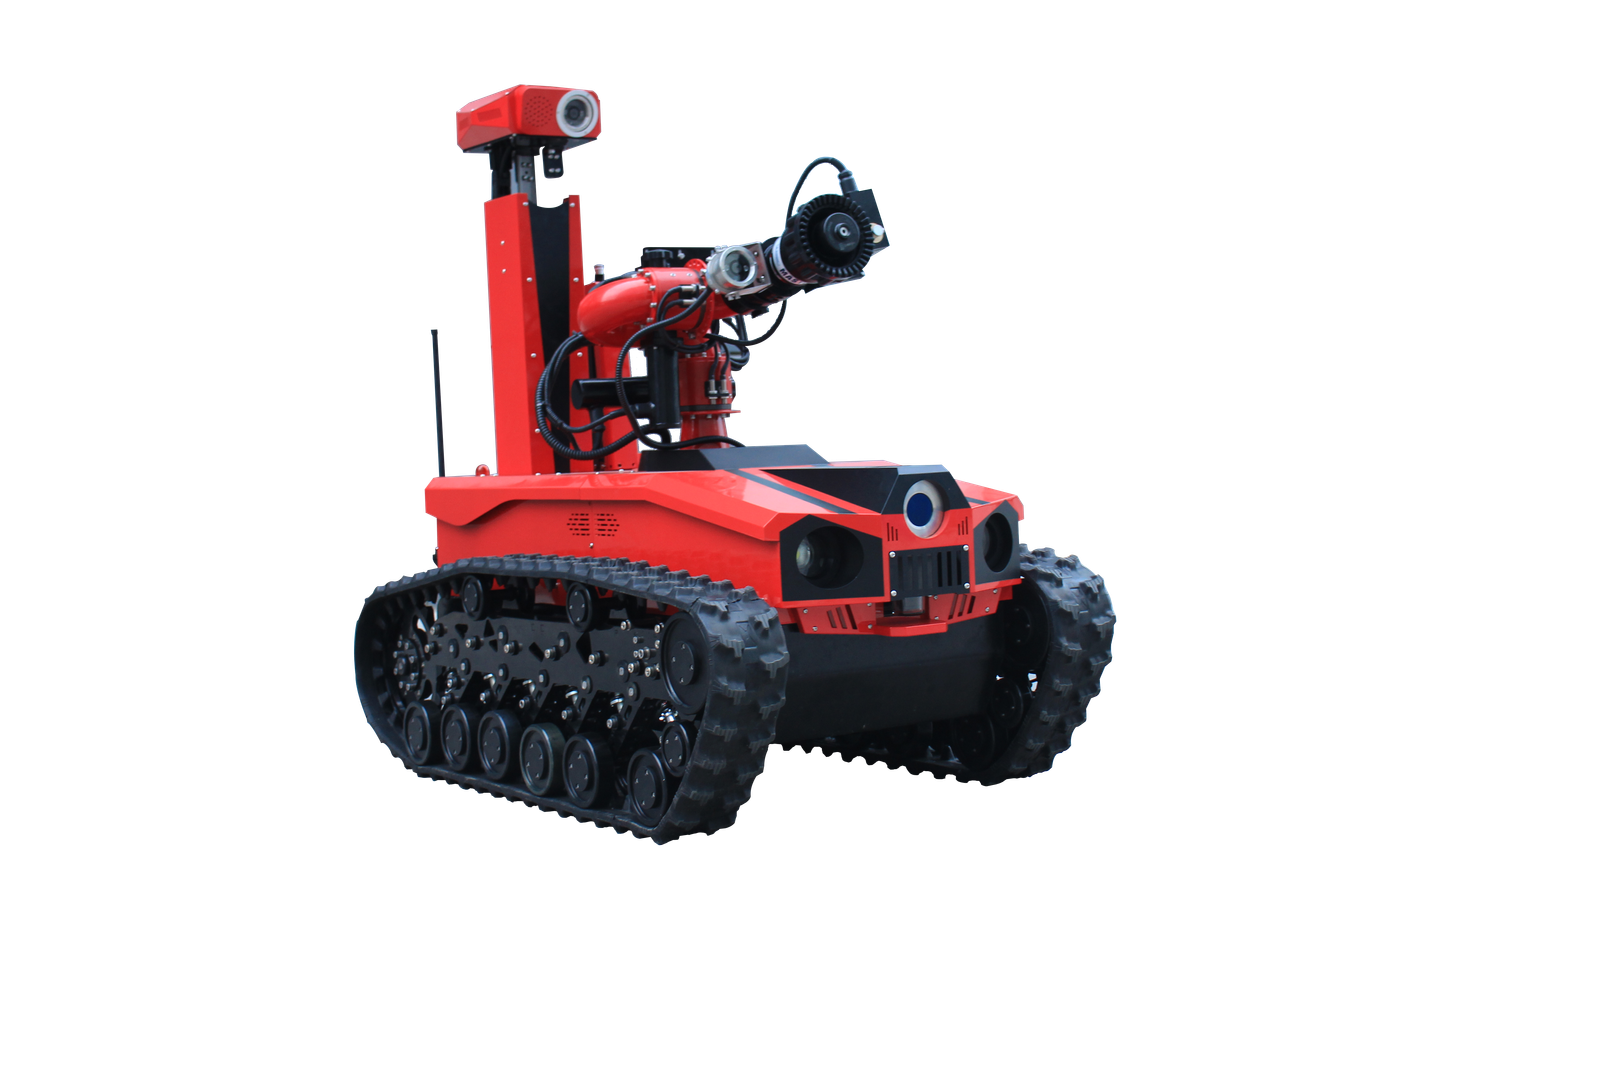 Explosion-proof Fire Fighting Robot